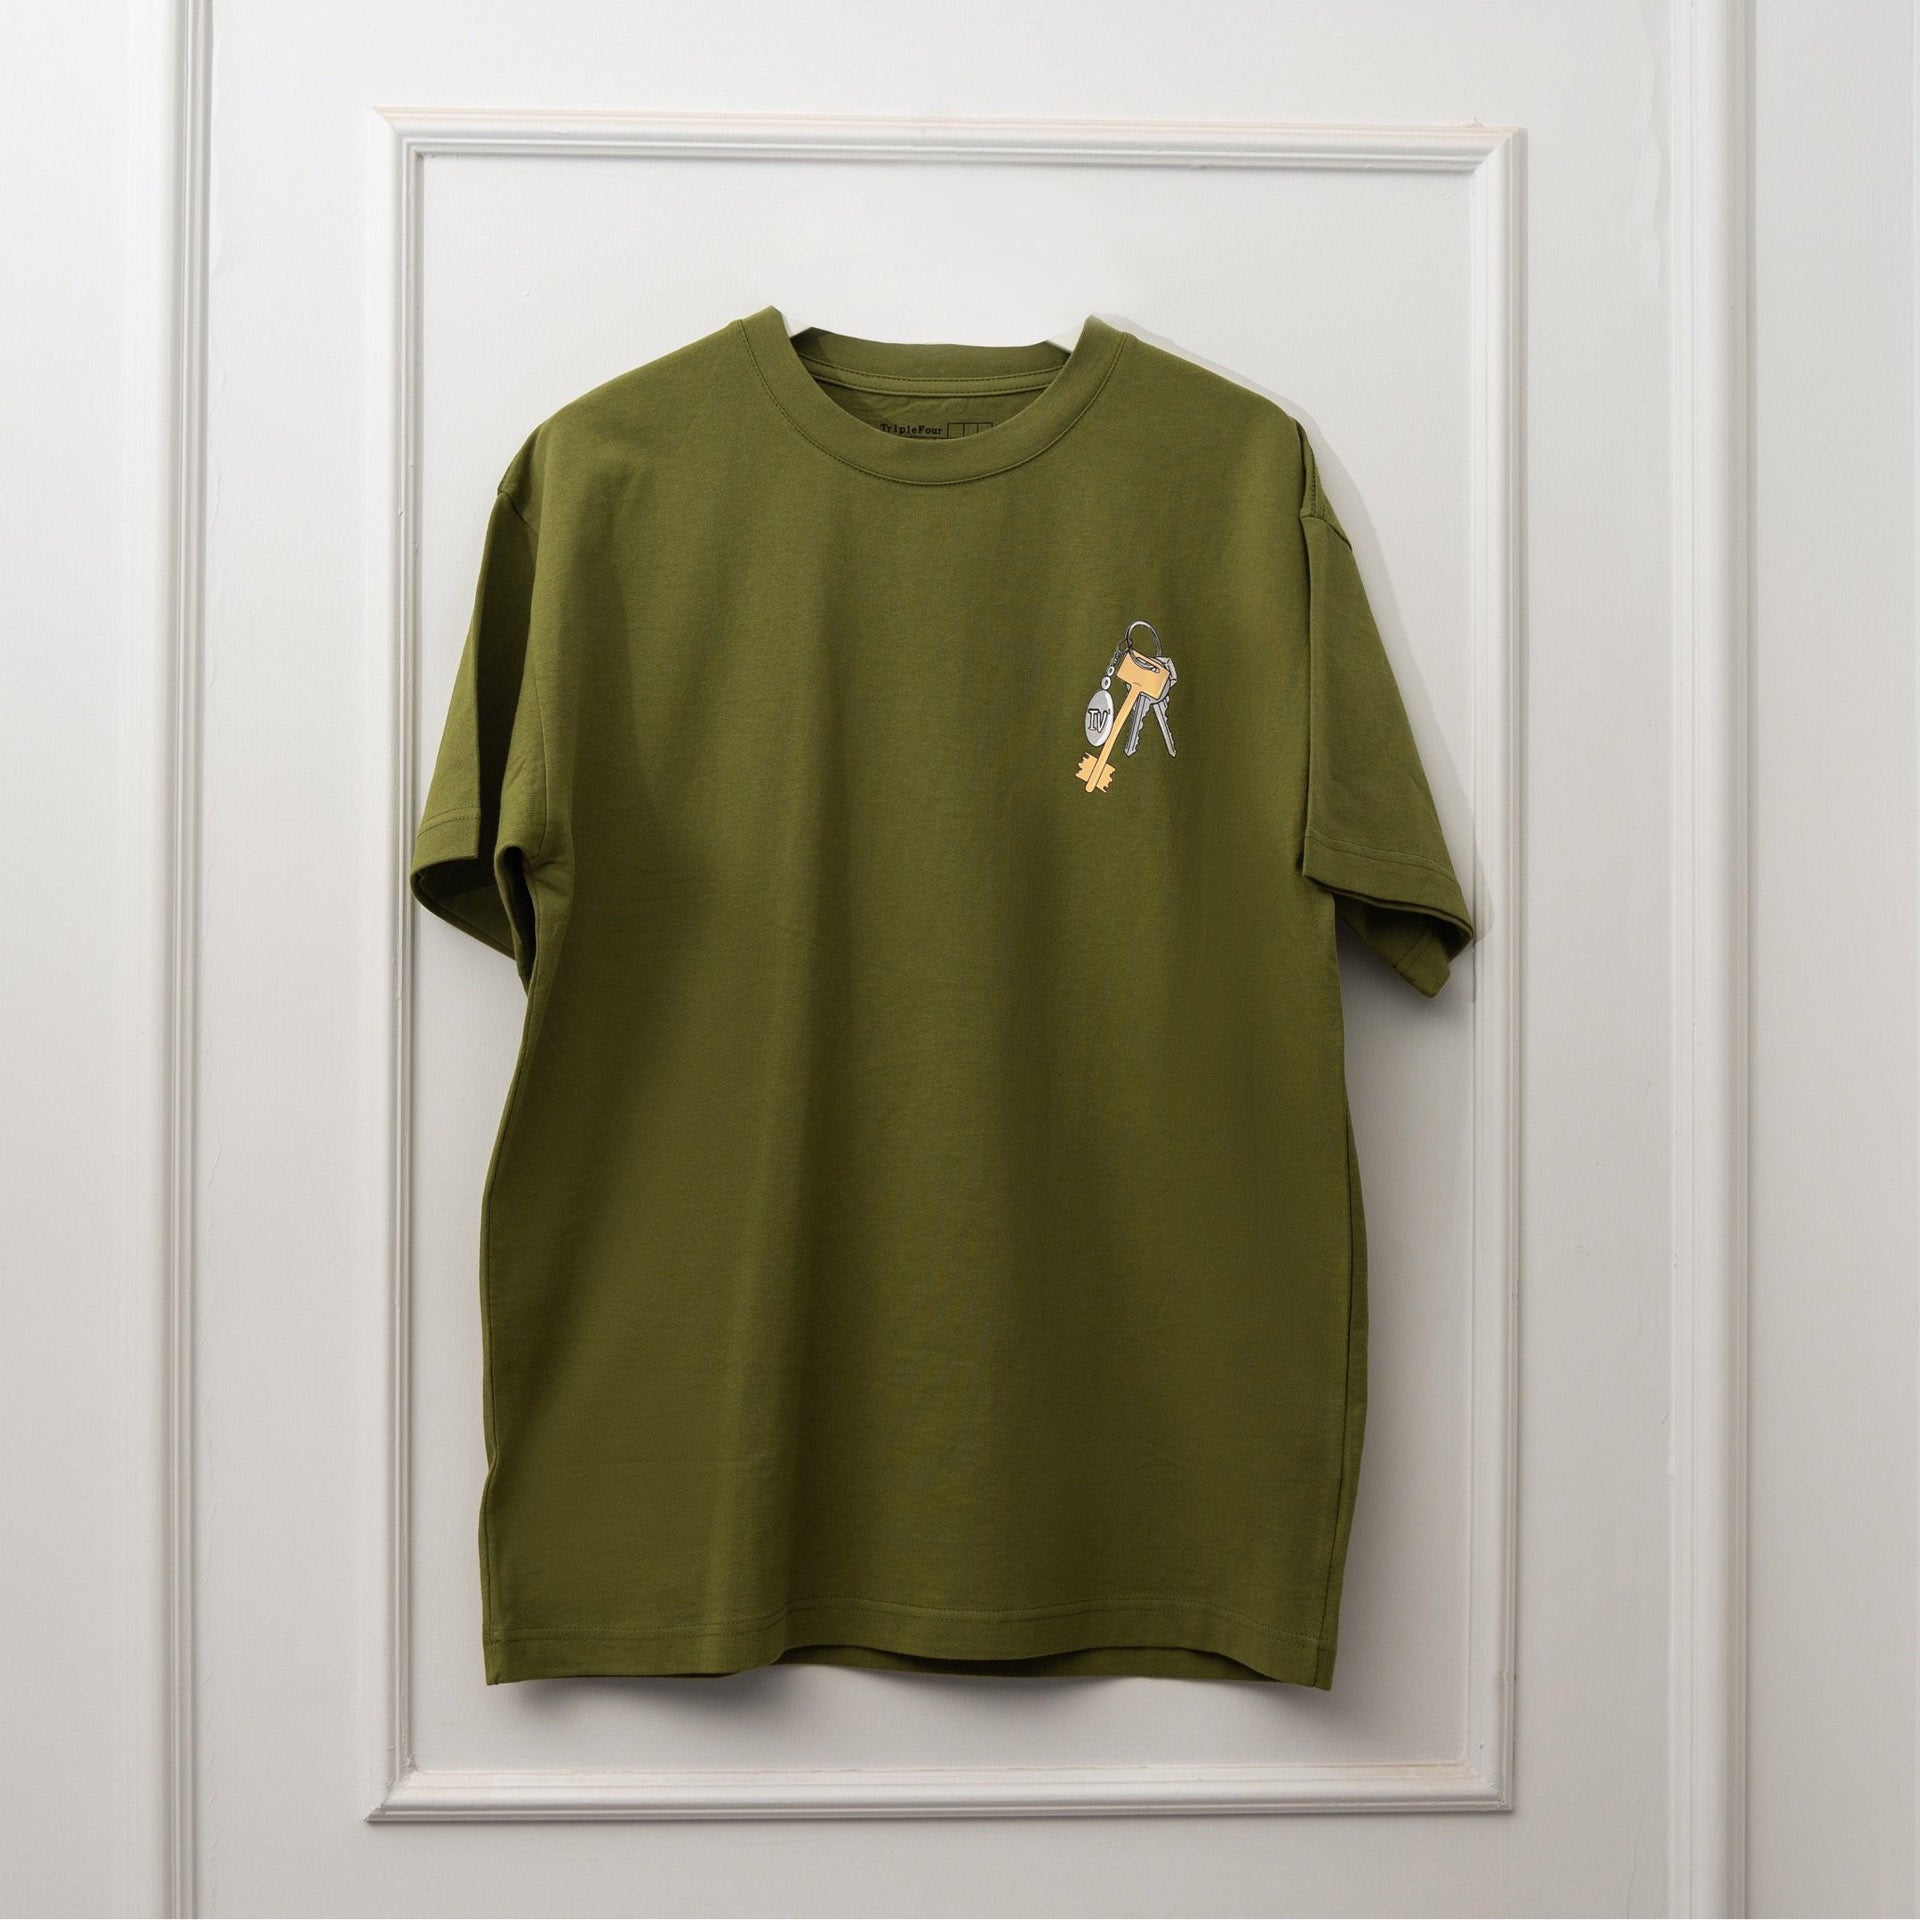 Green "Old Keys" T-shirt From Triple Four